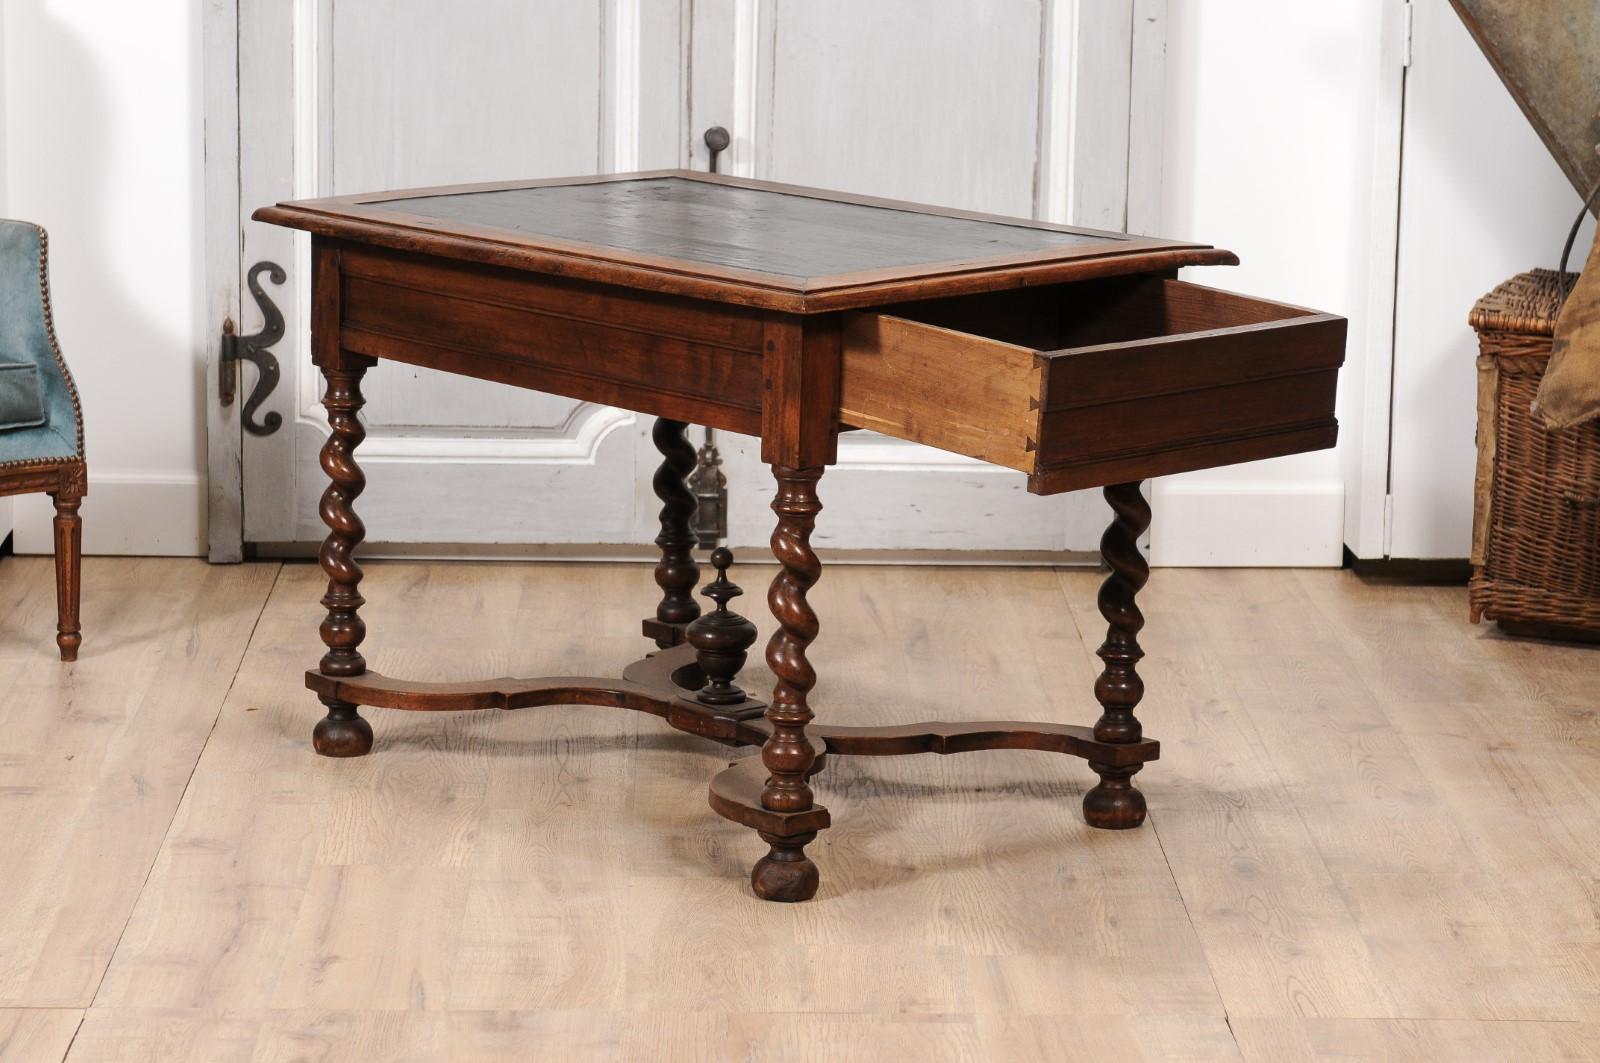 Louis XIII Period 1630s Carved Walnut Barley Twist Table with Black Painted Top For Sale 3